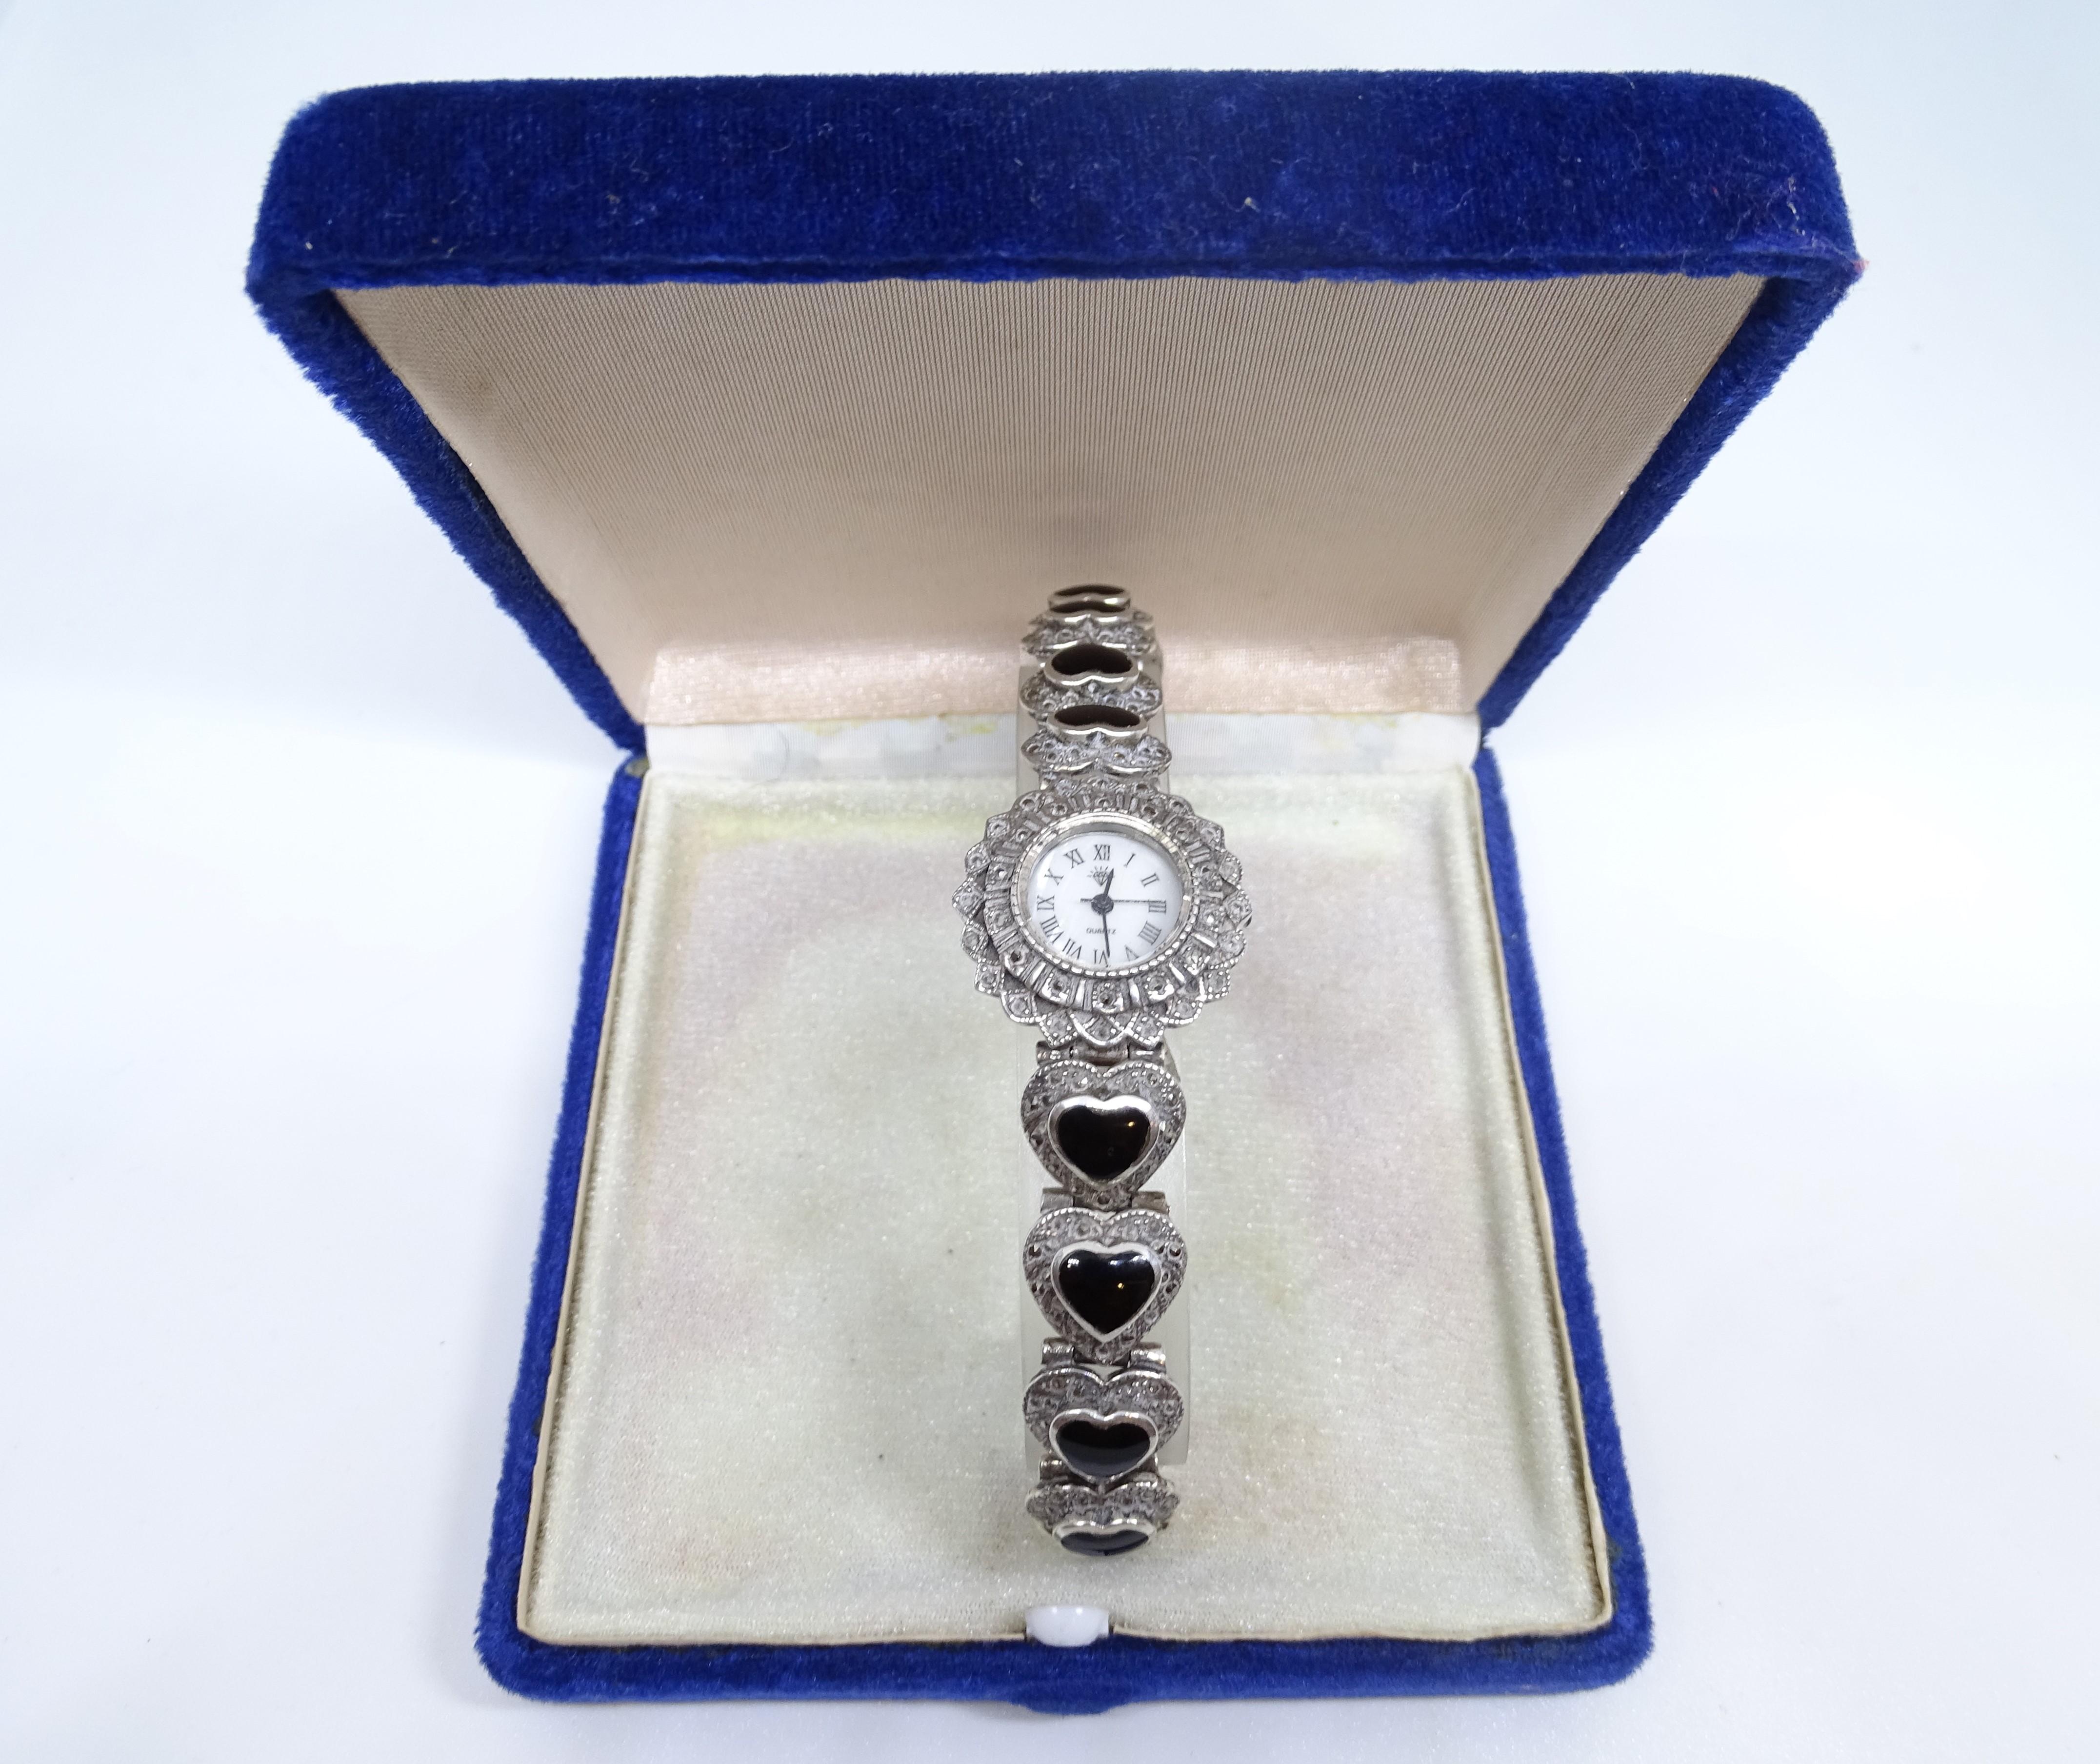 Silver and onyx watch for women - Vintage, s. XX
Japan quartz movt 925
Delicate watch made of 925 punched silver with heart-shaped onyx cabochons that make up its bracelet. It has a refined case design, with a double bezel, one of them in the shape